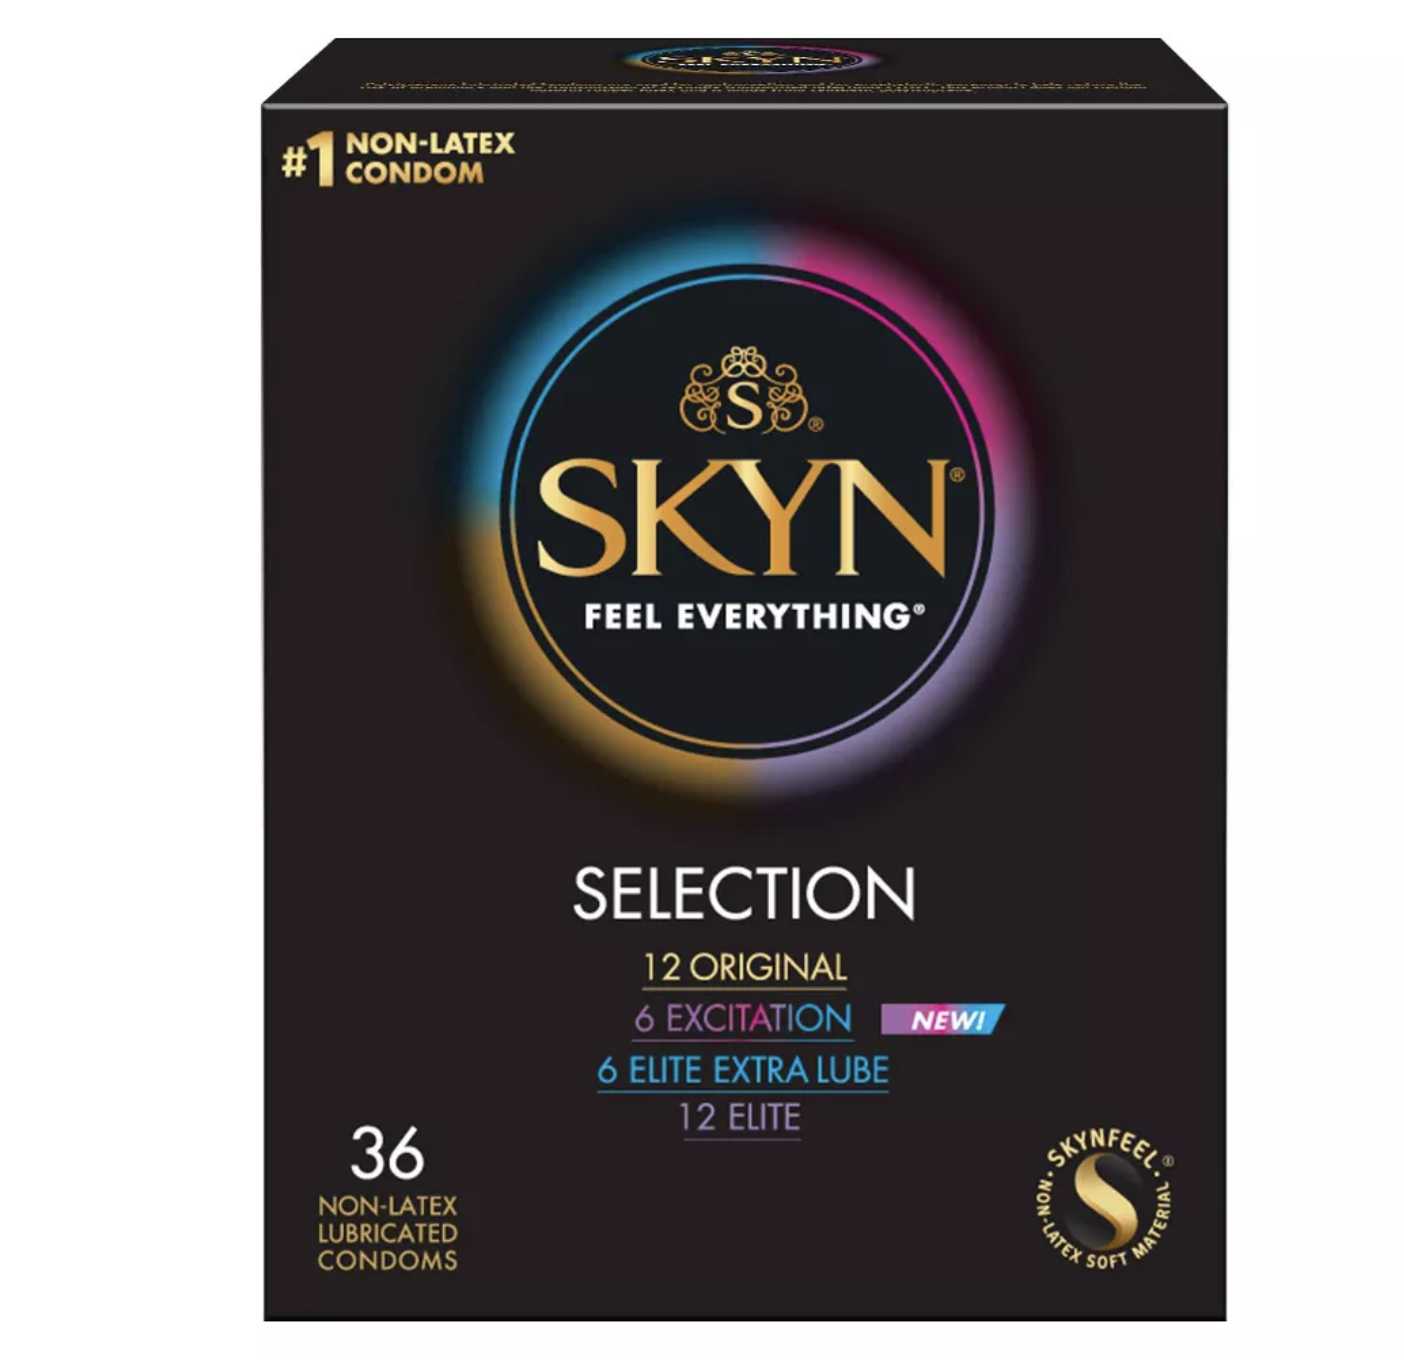 Product image of box of varied Skyn condoms